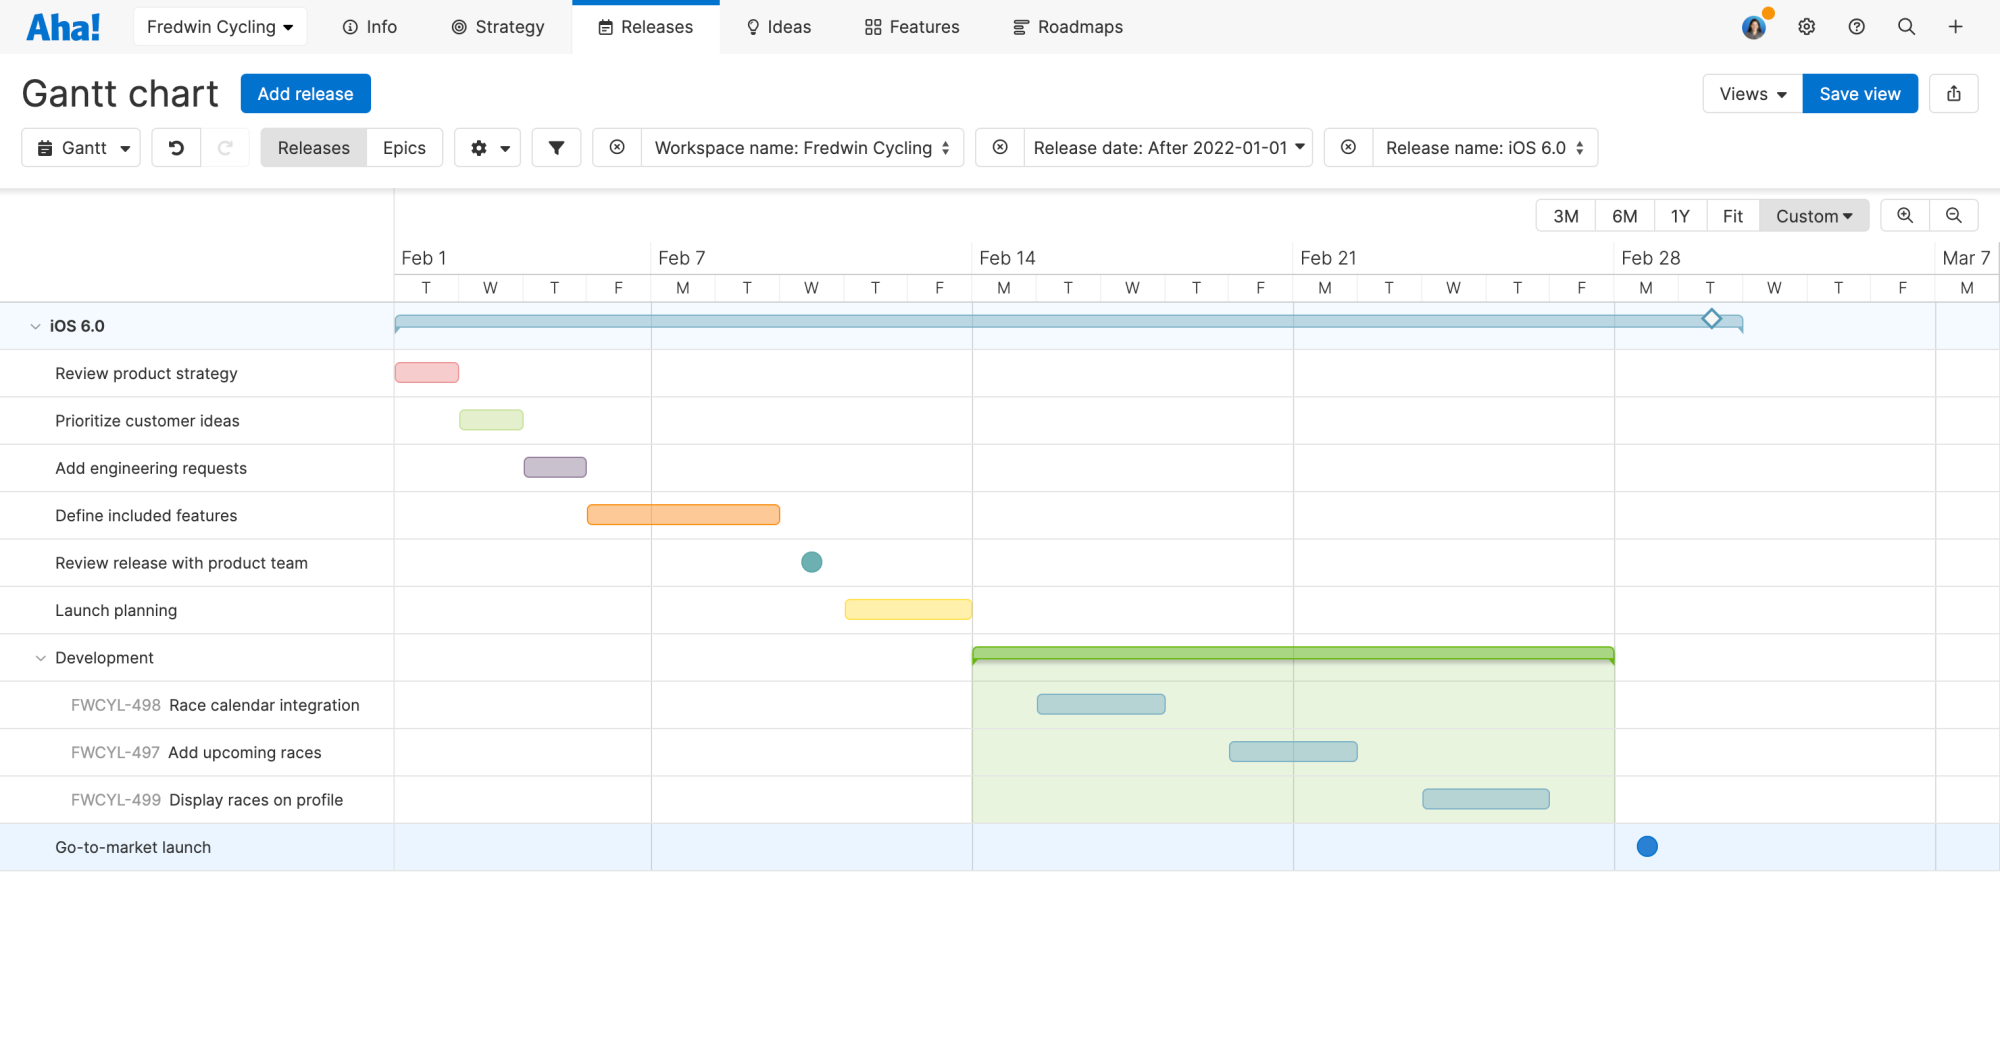 Now if you hide weekends from the Gantt chart you will not inadvertently hide milestones. They will automatically adjust to fall on weekdays when the template is applied.